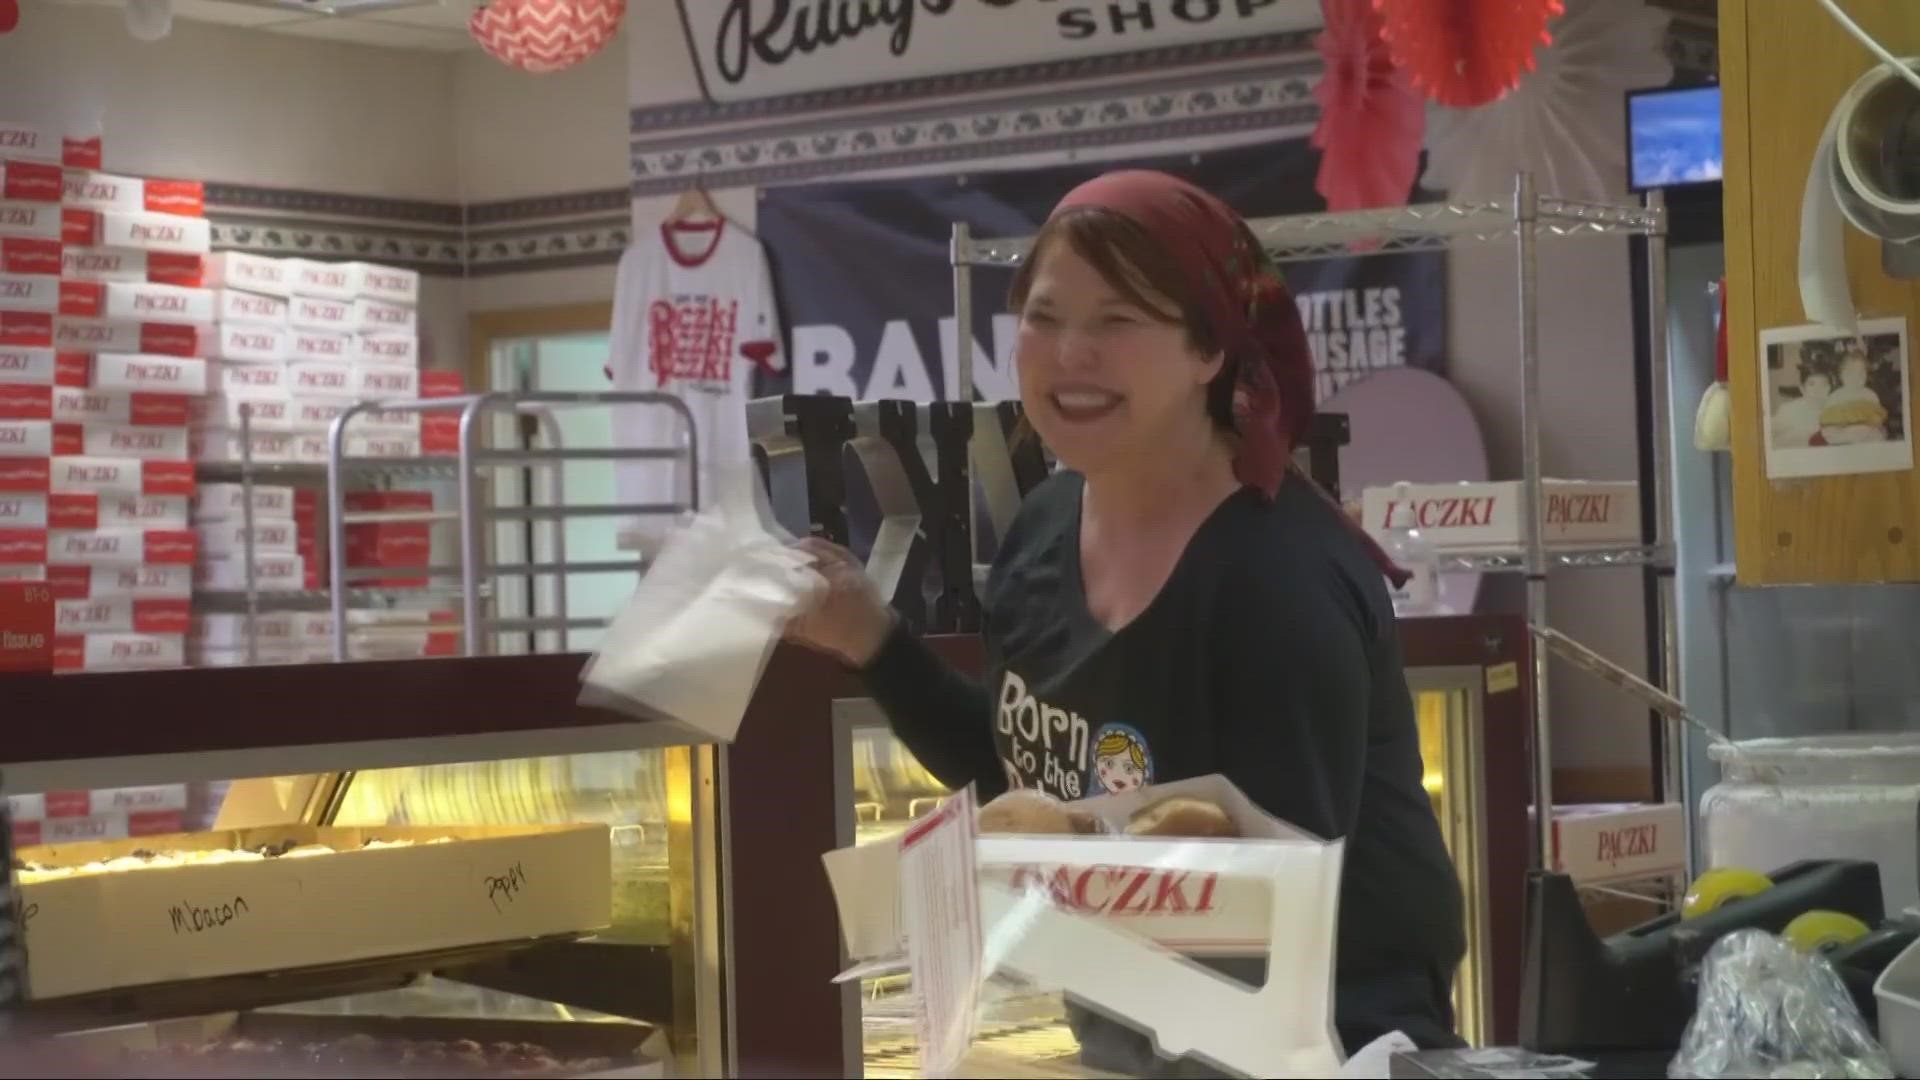 It's that time of year again! Fat Tuesday has arrived and we're celebrating the special day at Rudy's Strudel and Bakery in Parma as they serve up paczki.